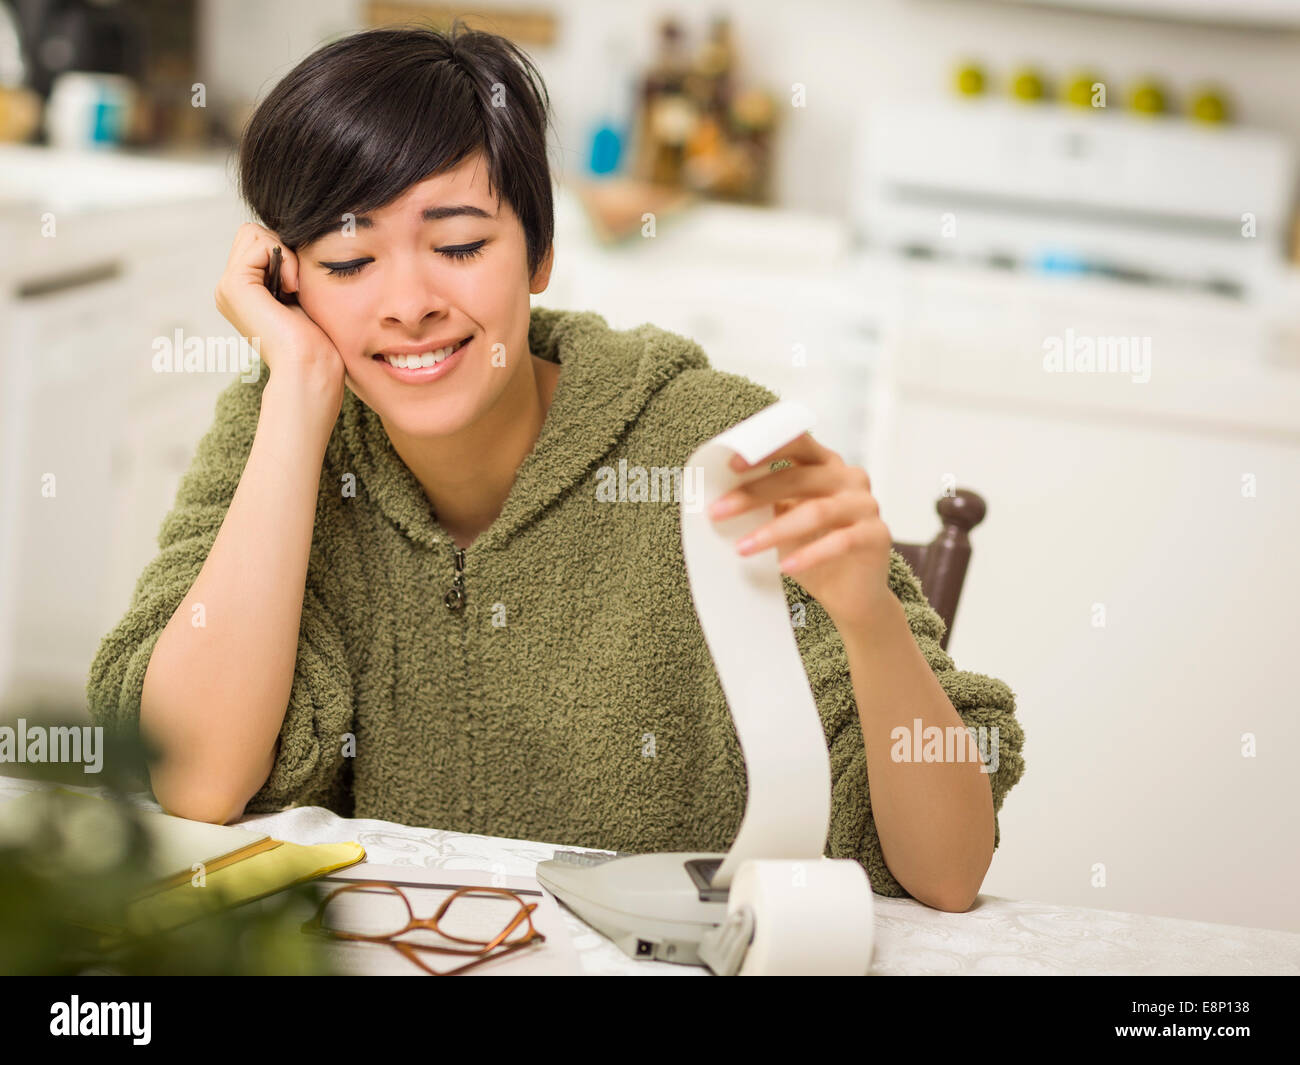 Multi-ethnic Young Woman Relieved and Smiling Over Financial Calculations in Her Kitchen. Stock Photo